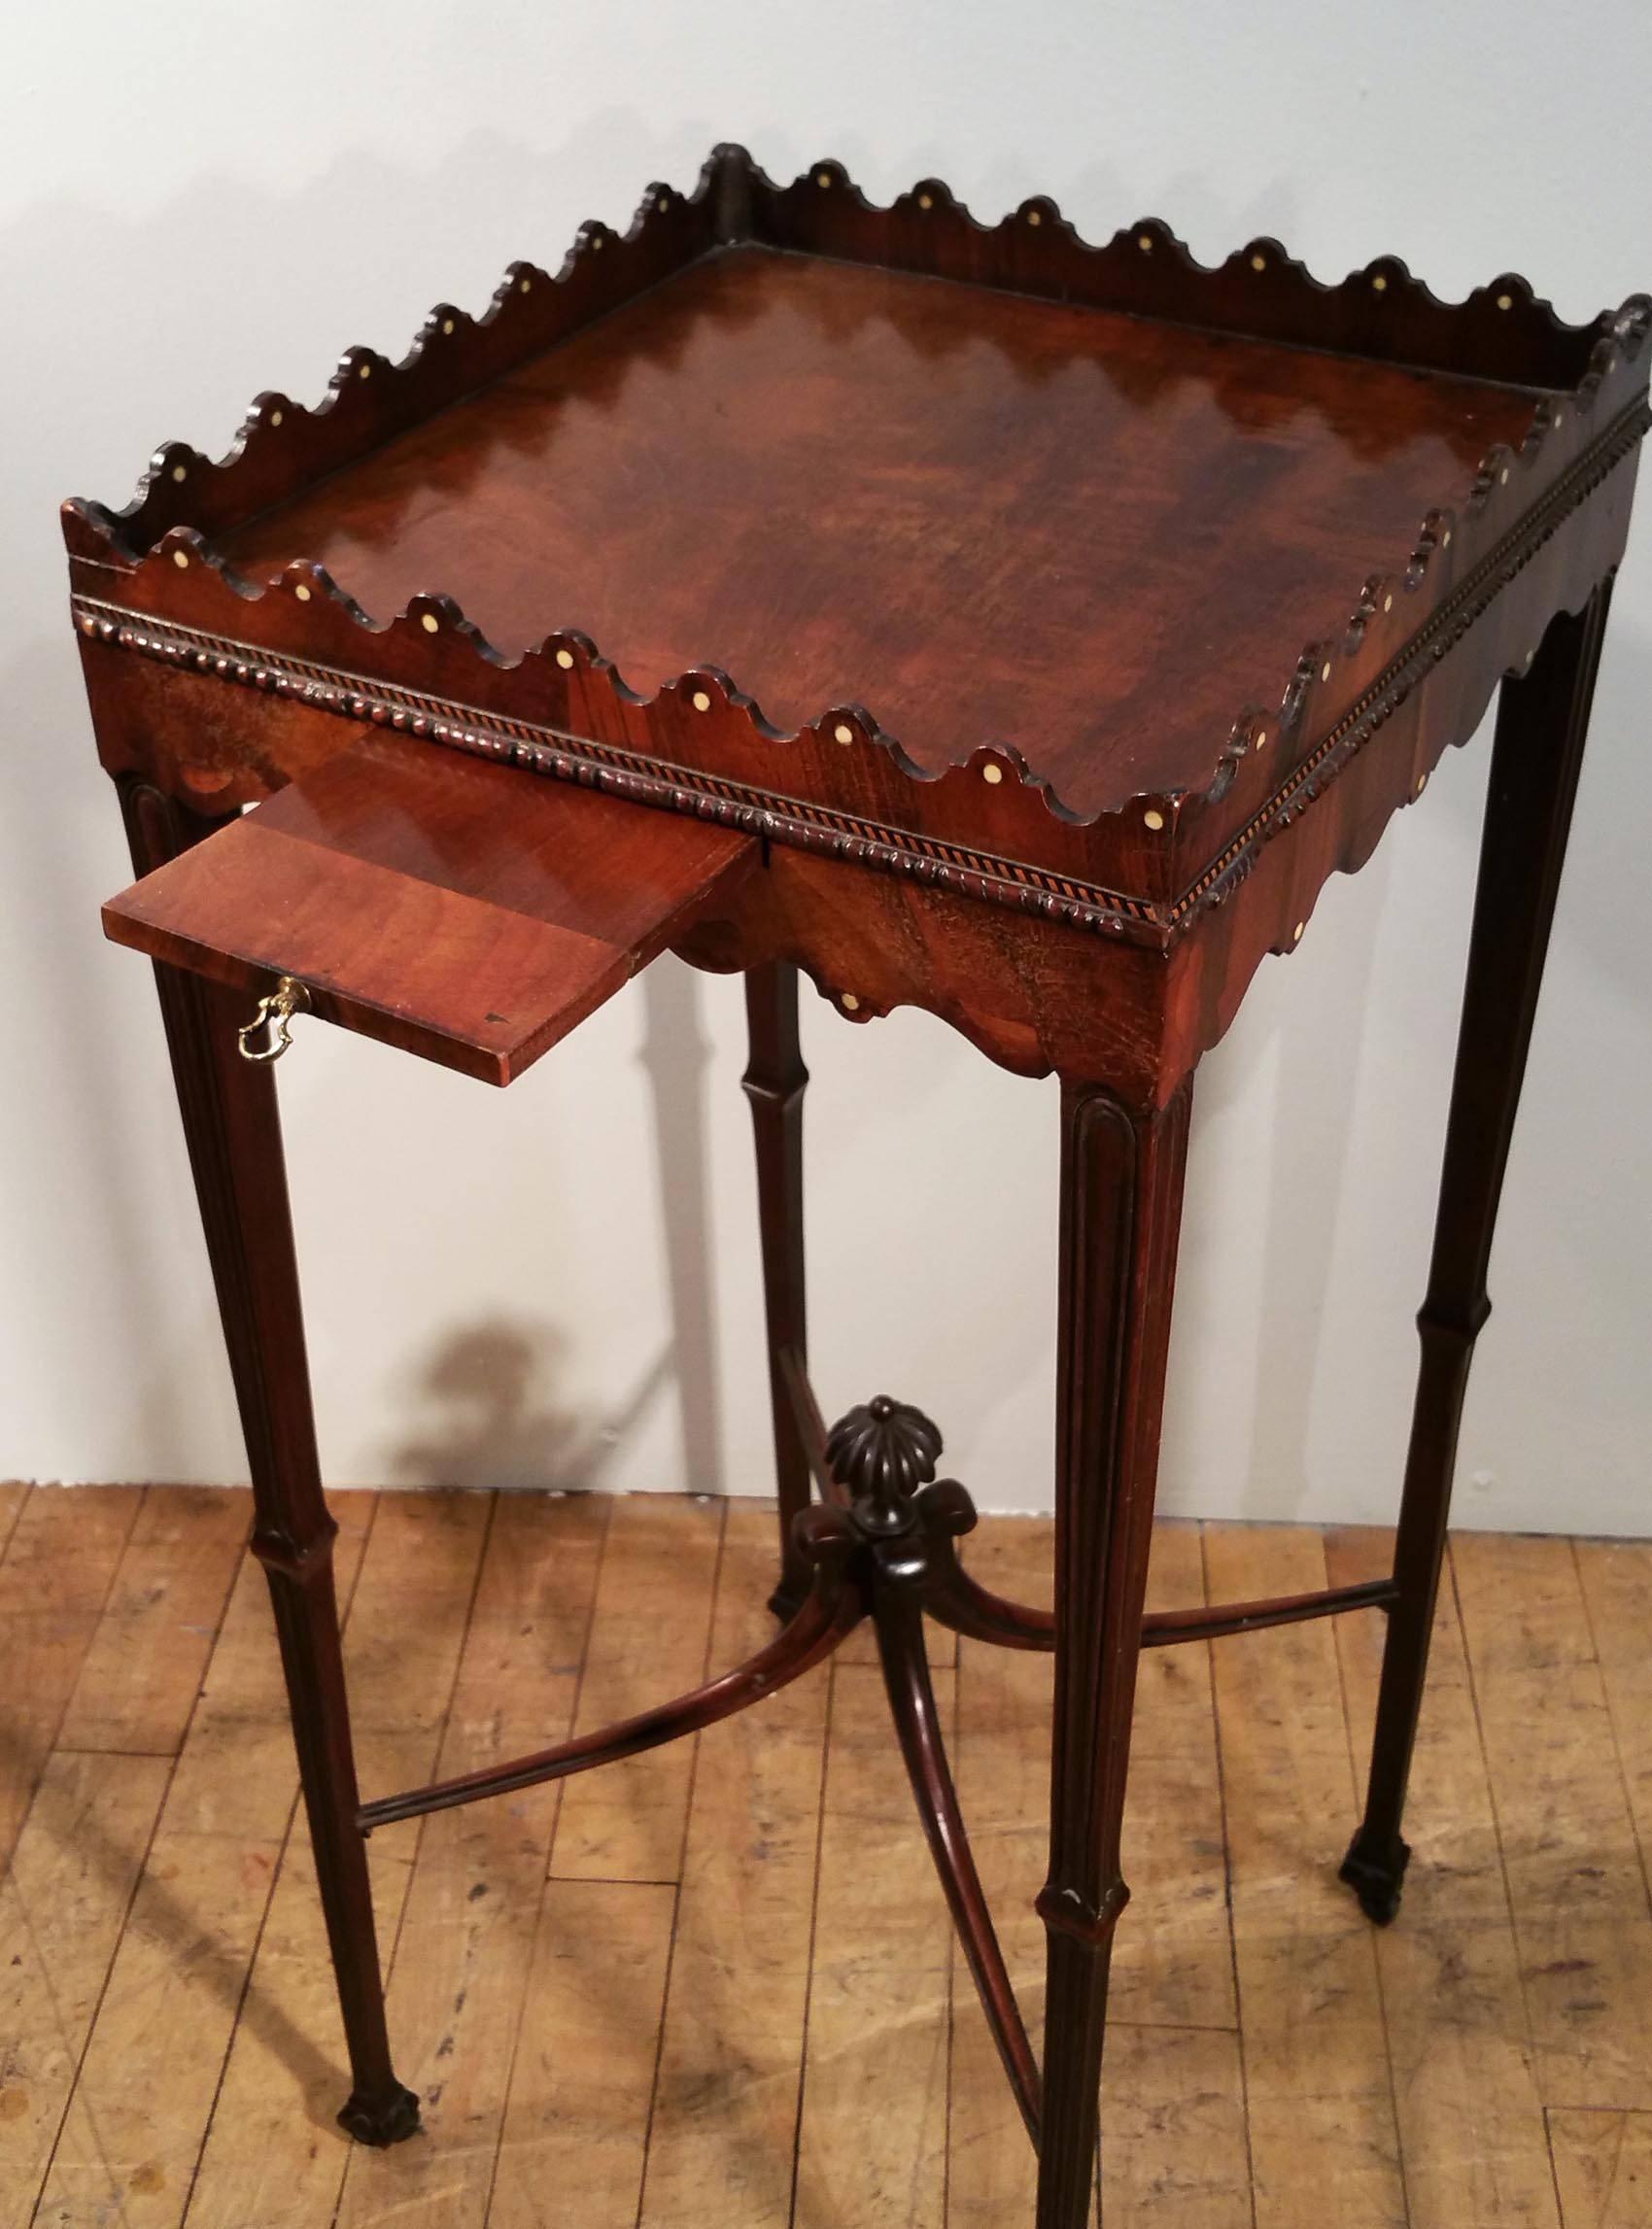 This superb 19th c. mahogany George III kettle stand is in the manner of Chippendale and features a small slide with a brass pull underneath the front apron for cups. The stand has a thin rope trim around the sides with a decorative and shaped